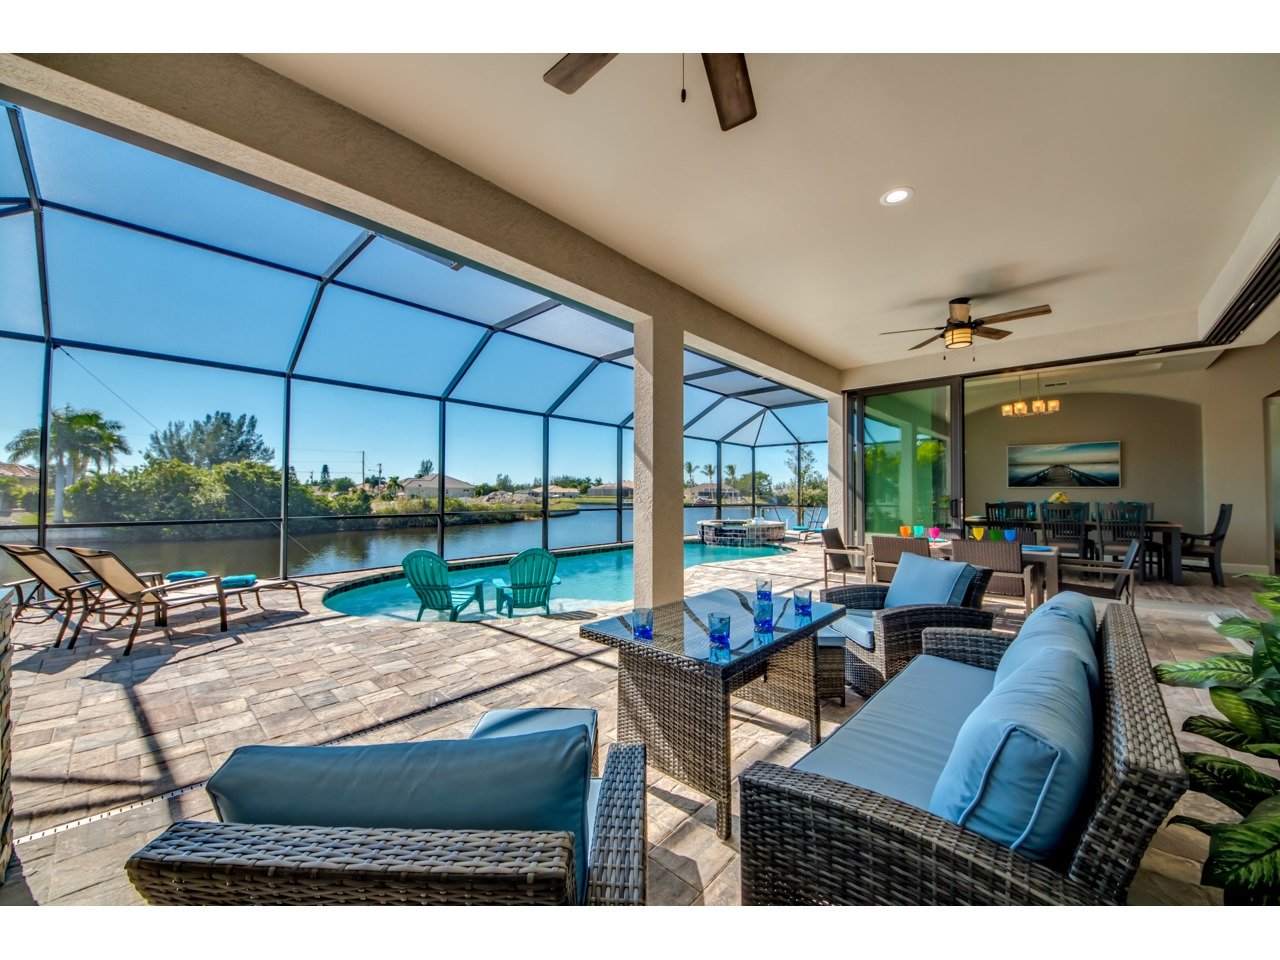 Vacation rental with outdoor seating